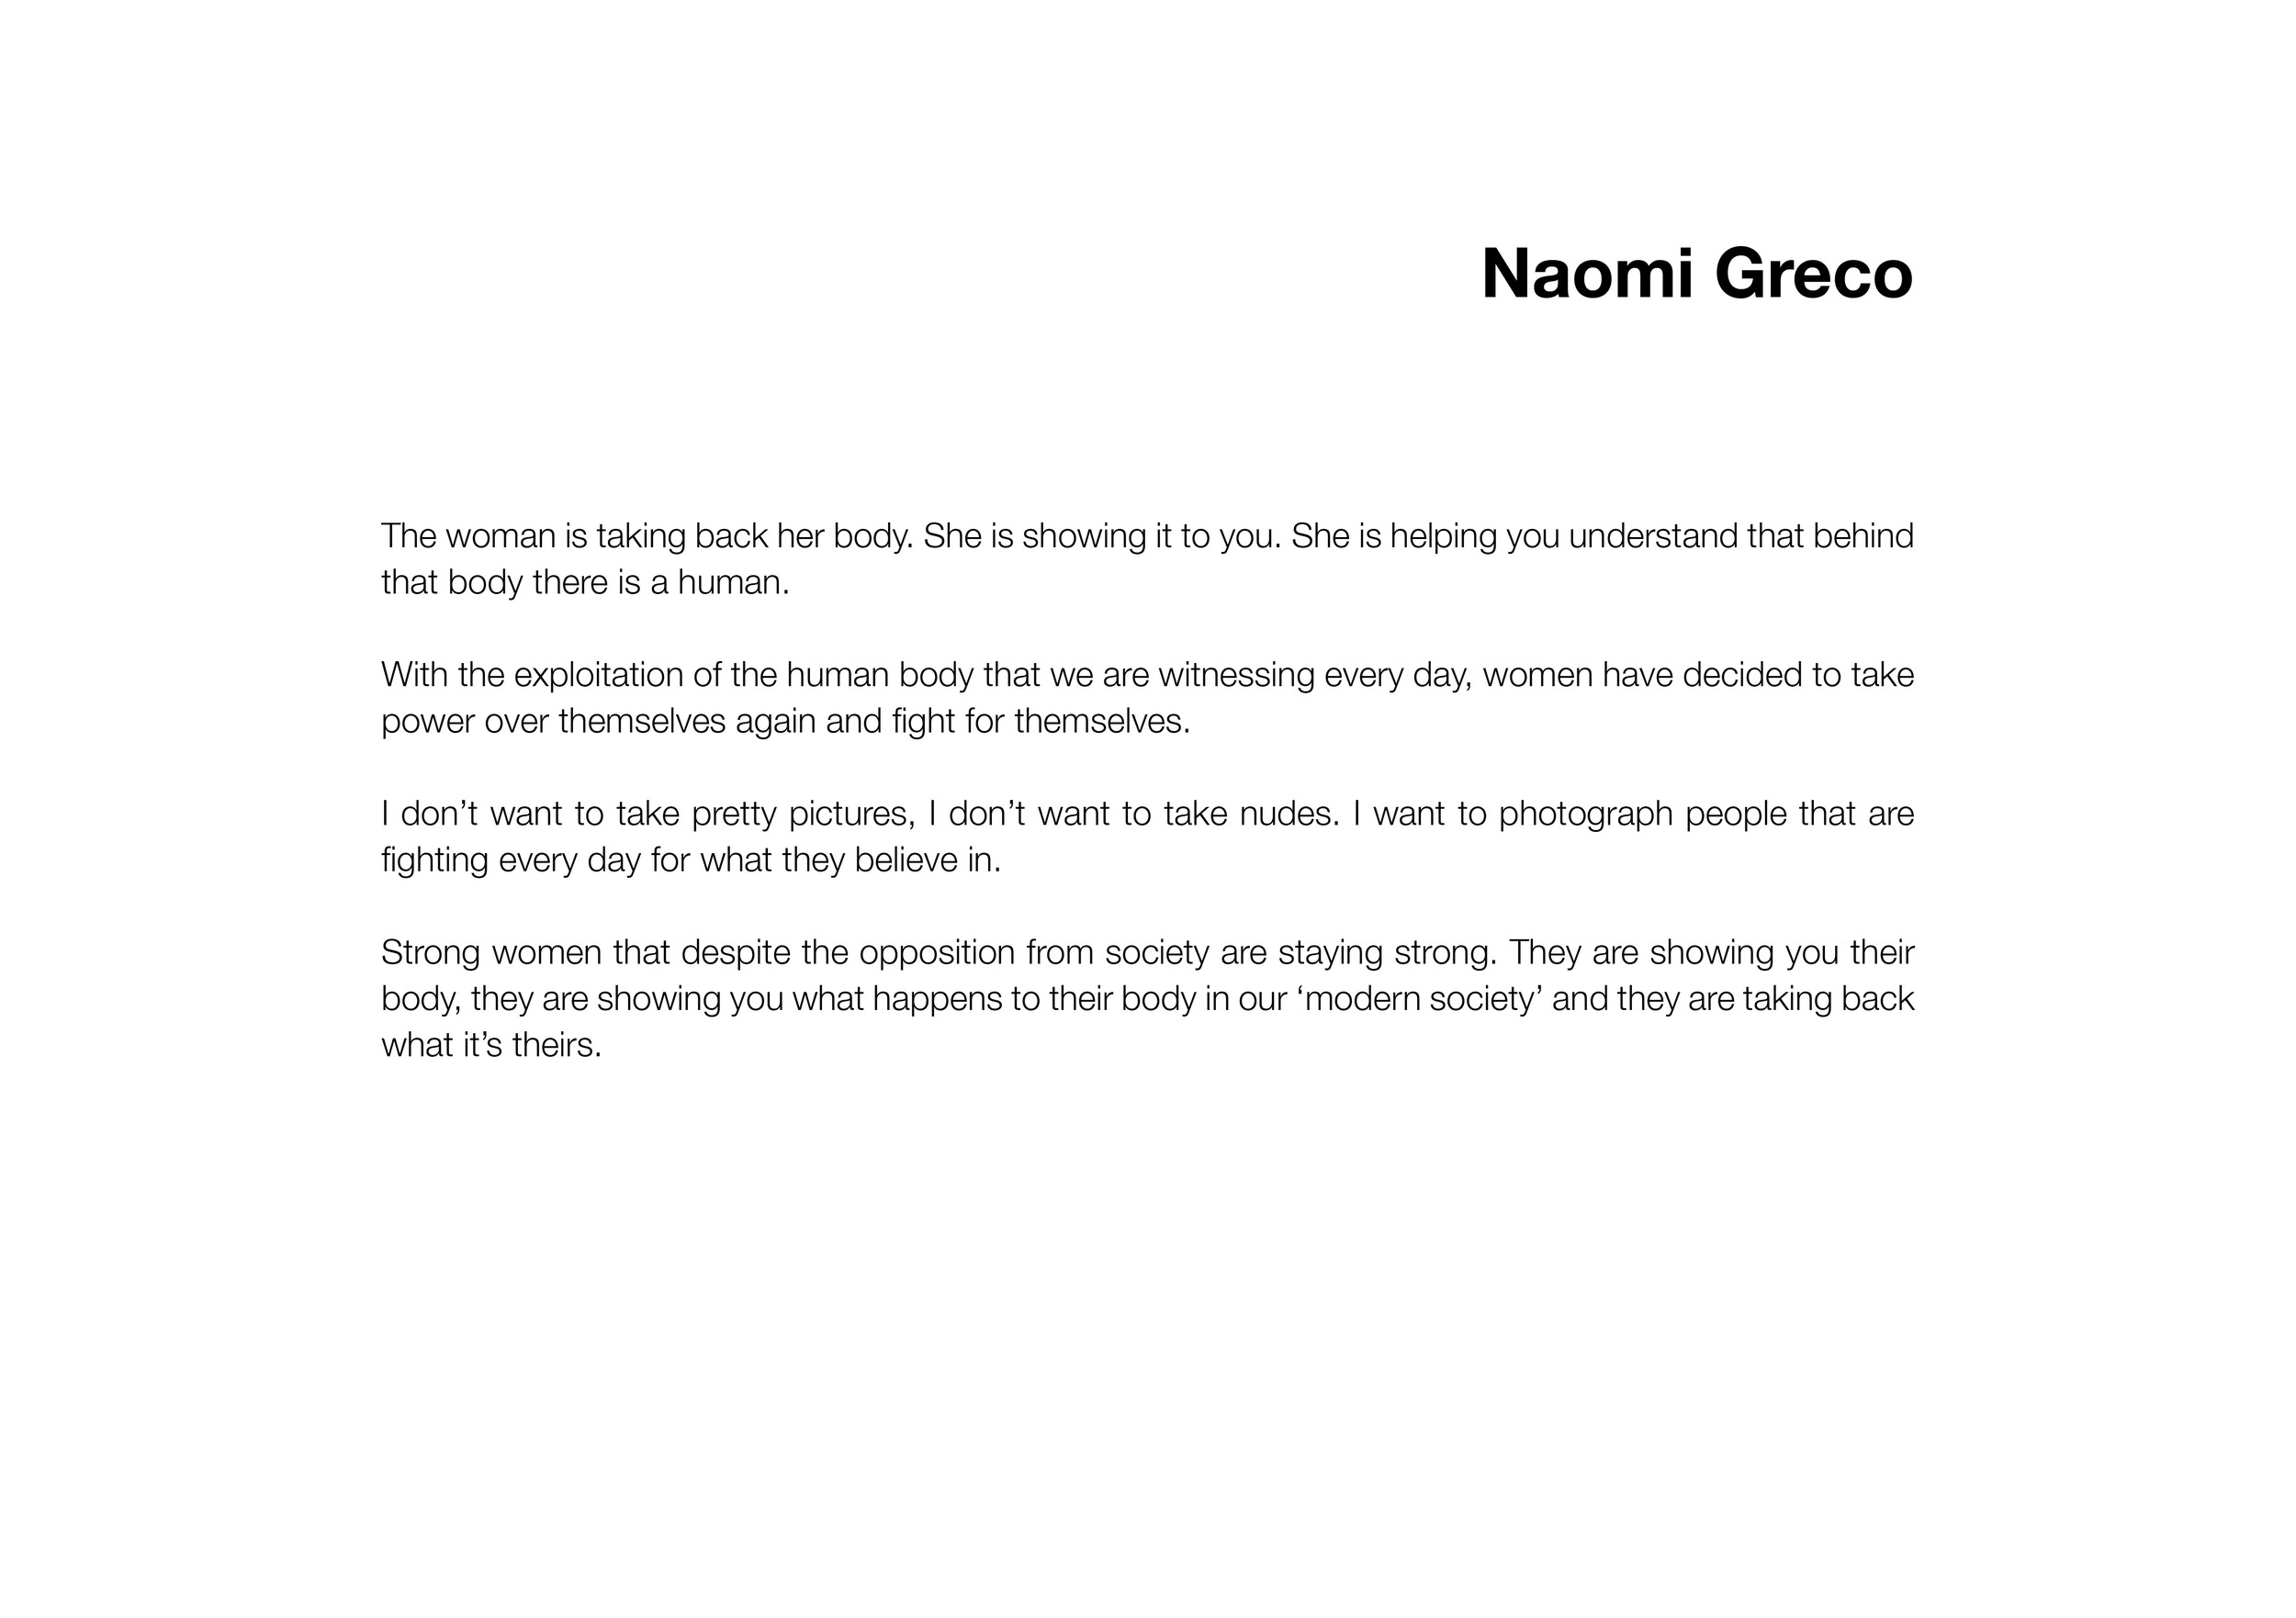 naomi book not finished.jpg